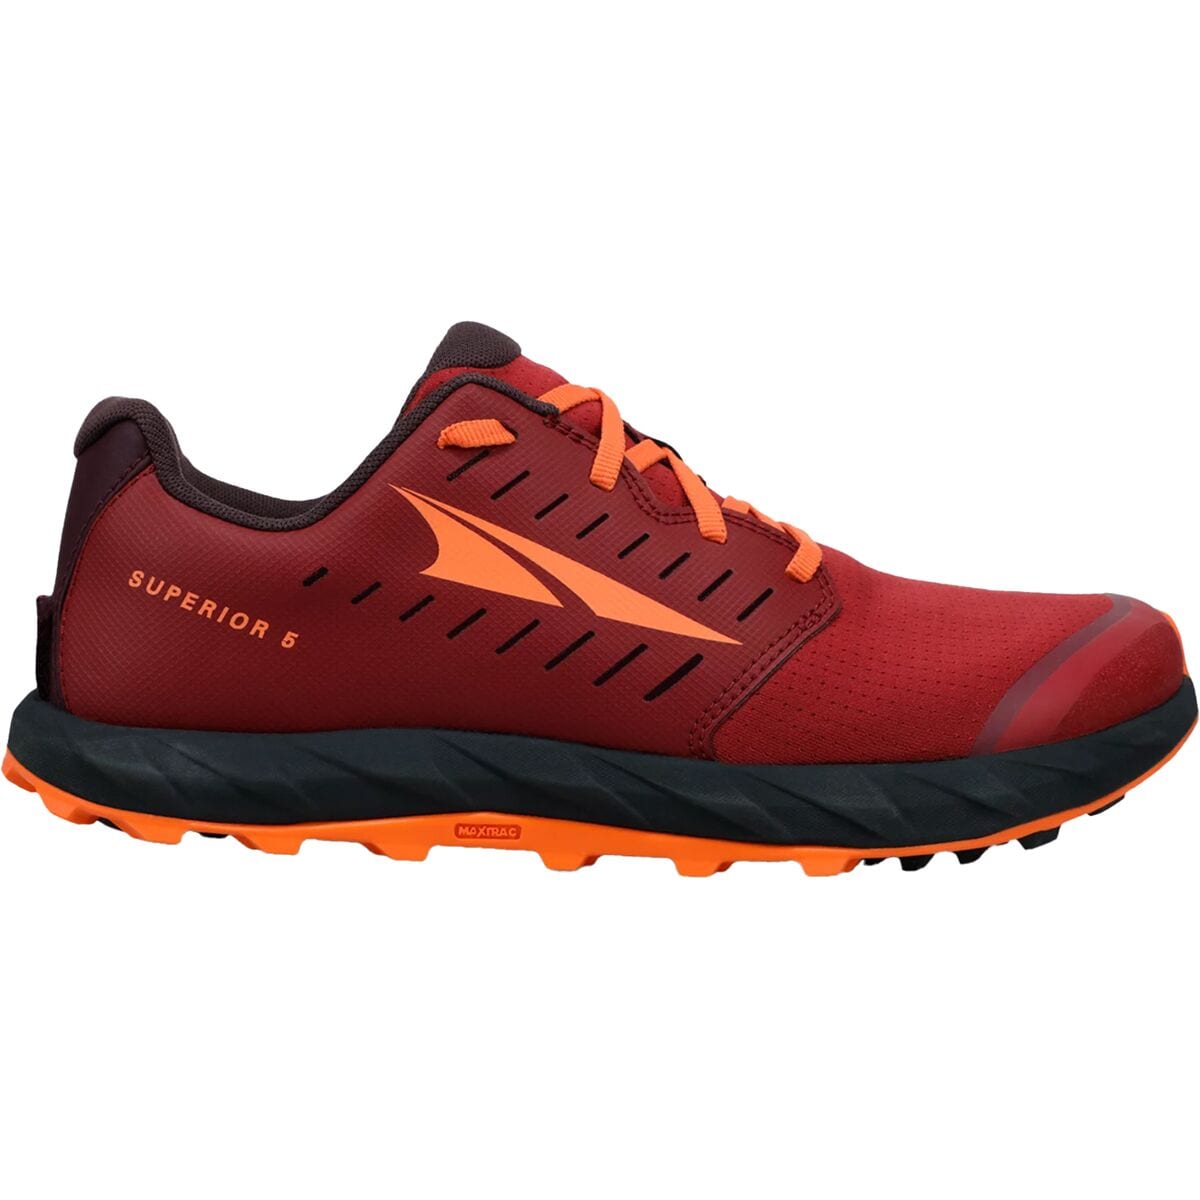 Superior 5 Trail Running Shoe - Women's Maroon, 8.0 by Altra | US-Parks.com